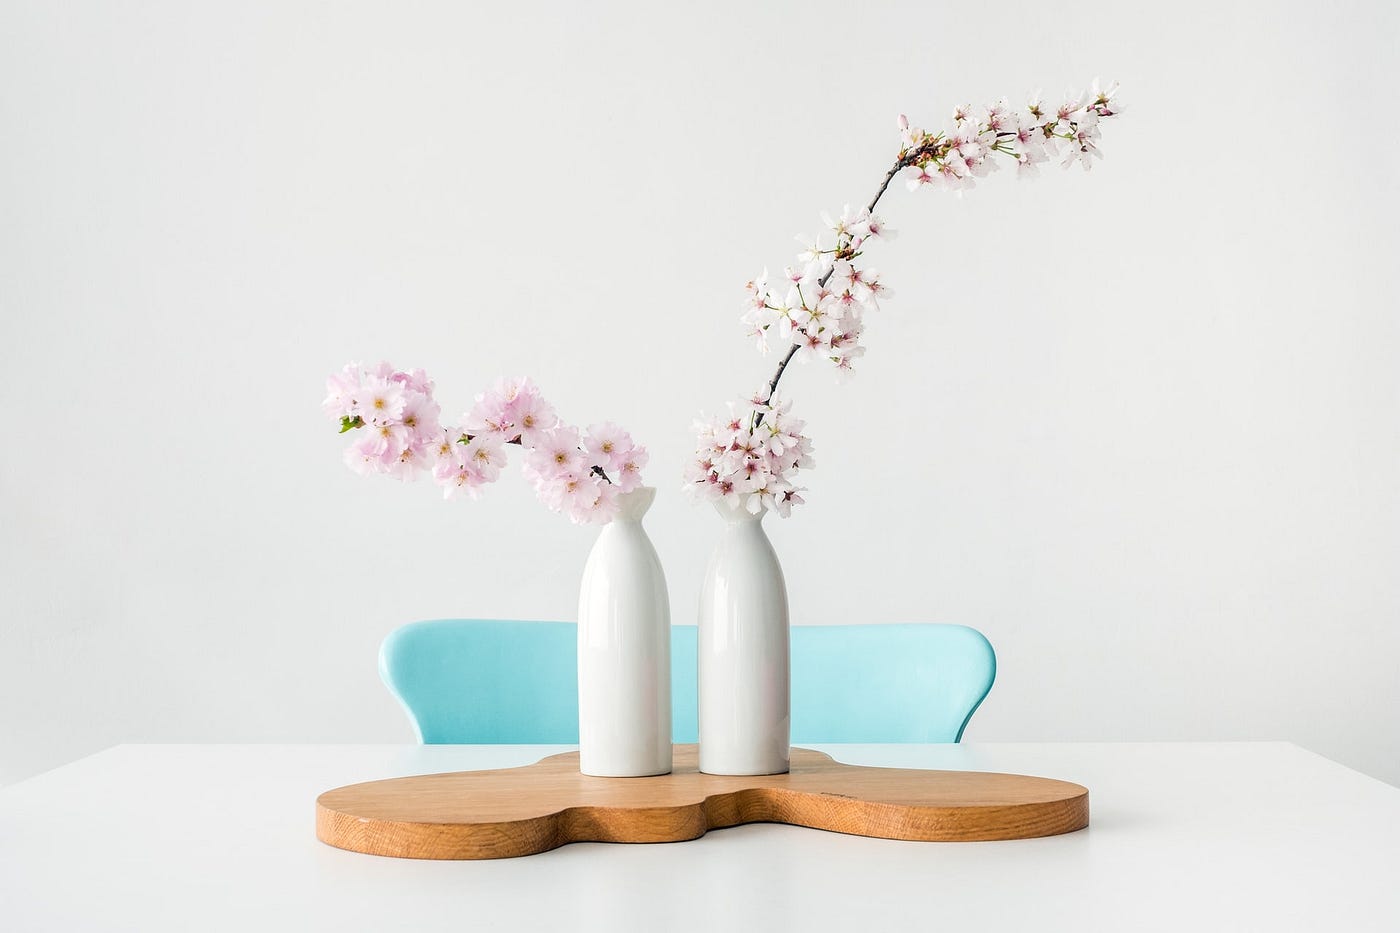 Two white vases with a stalk of flower each kept on a wooden board